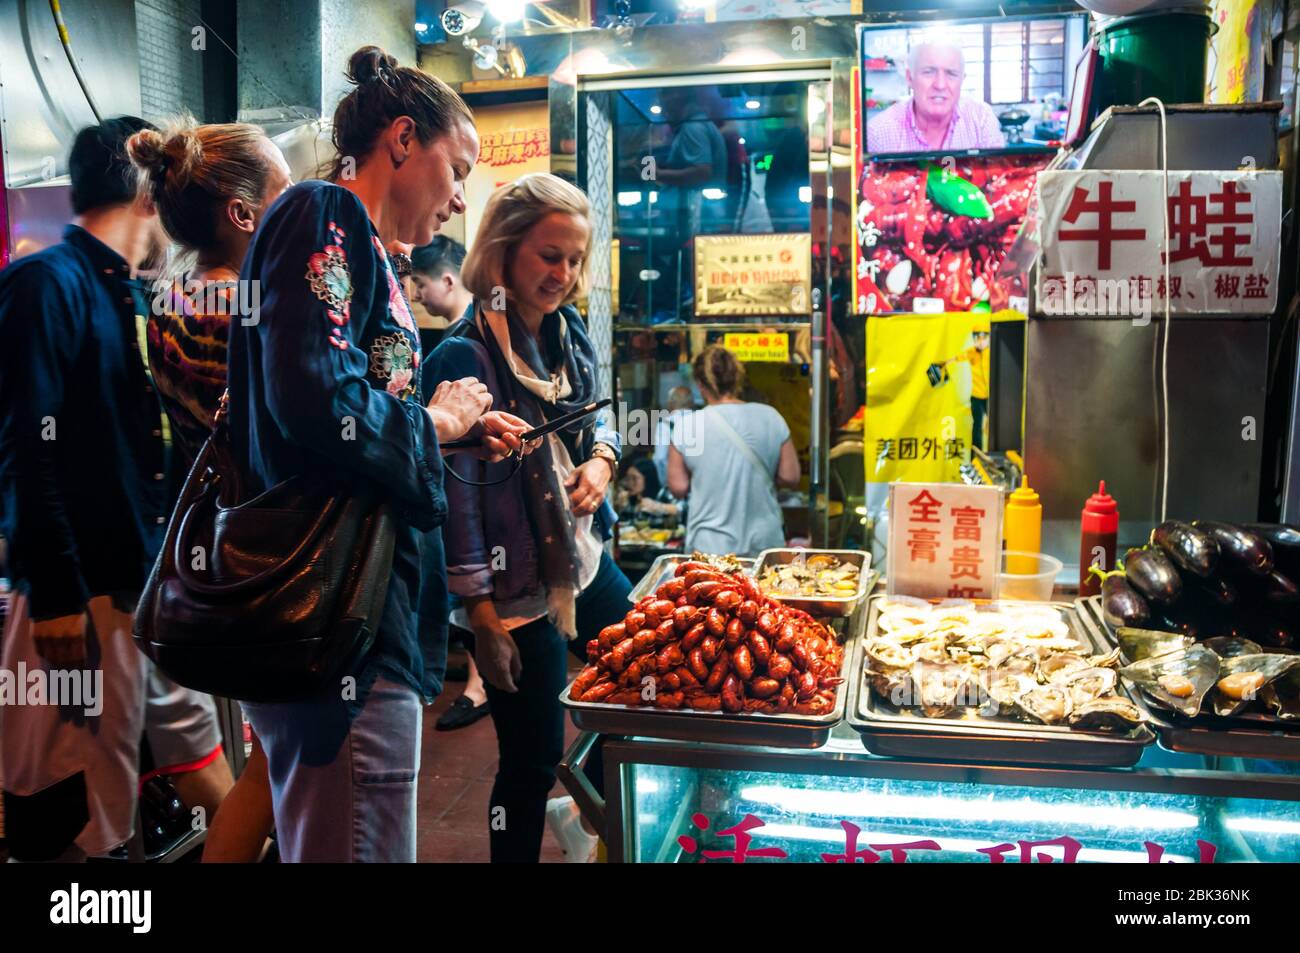 Tourists inspect the crayfish (yabbies) and other food outside a restaurant on Shanghai's Shouning Road. Stock Photo